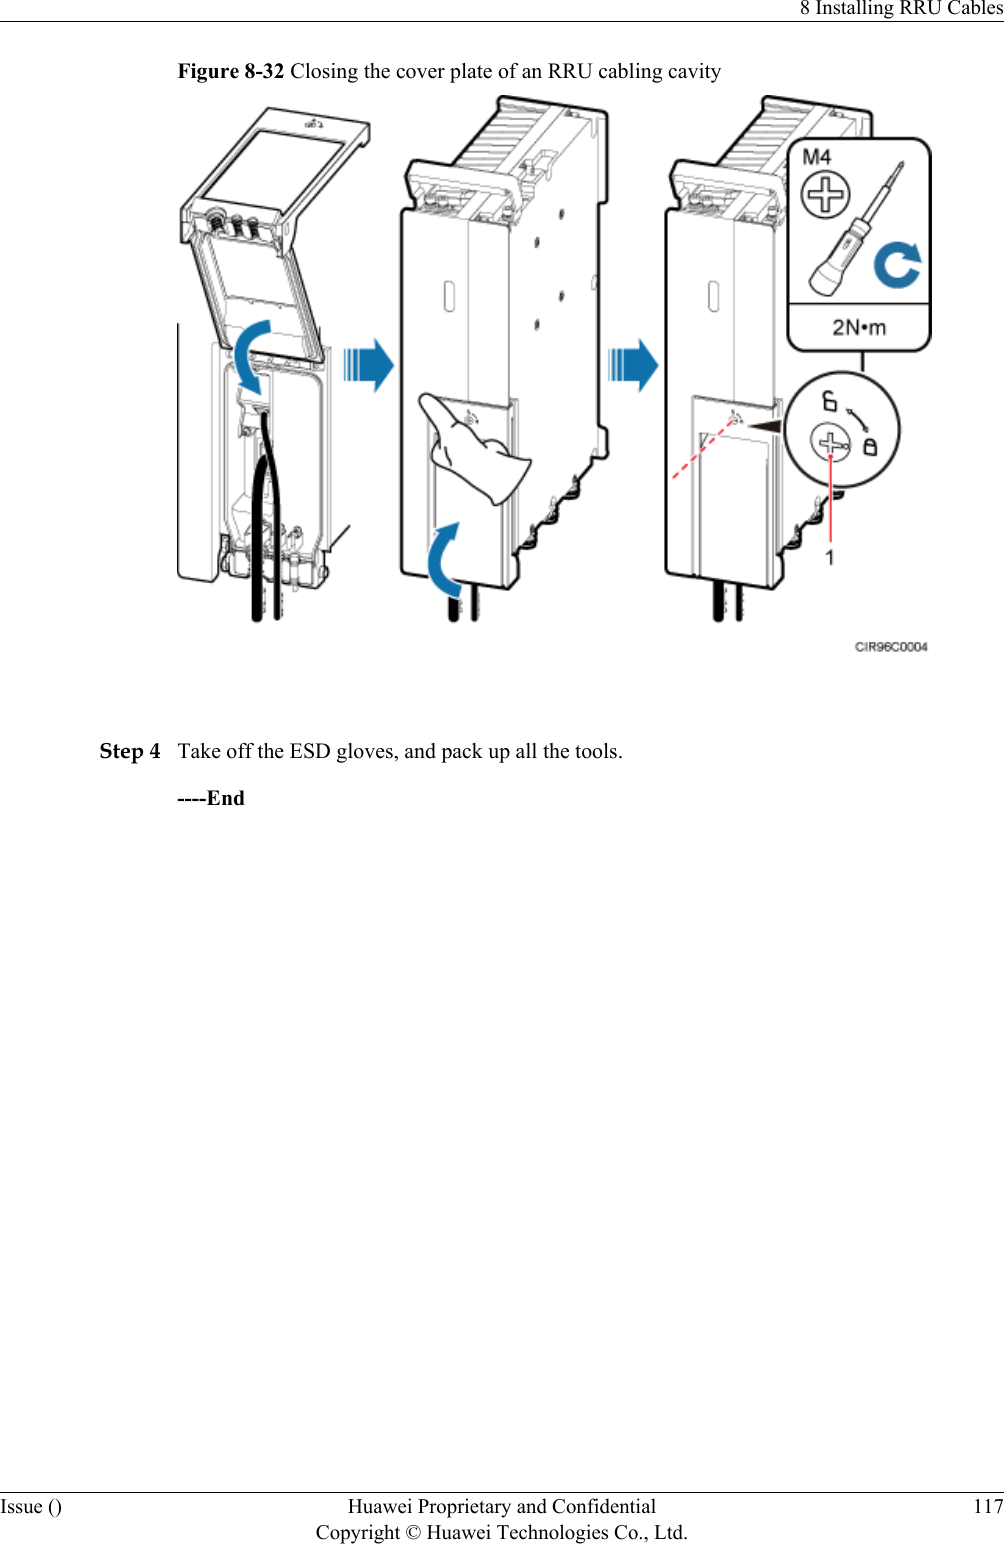 Figure 8-32 Closing the cover plate of an RRU cabling cavity Step 4 Take off the ESD gloves, and pack up all the tools.----End8 Installing RRU CablesIssue () Huawei Proprietary and ConfidentialCopyright © Huawei Technologies Co., Ltd.117